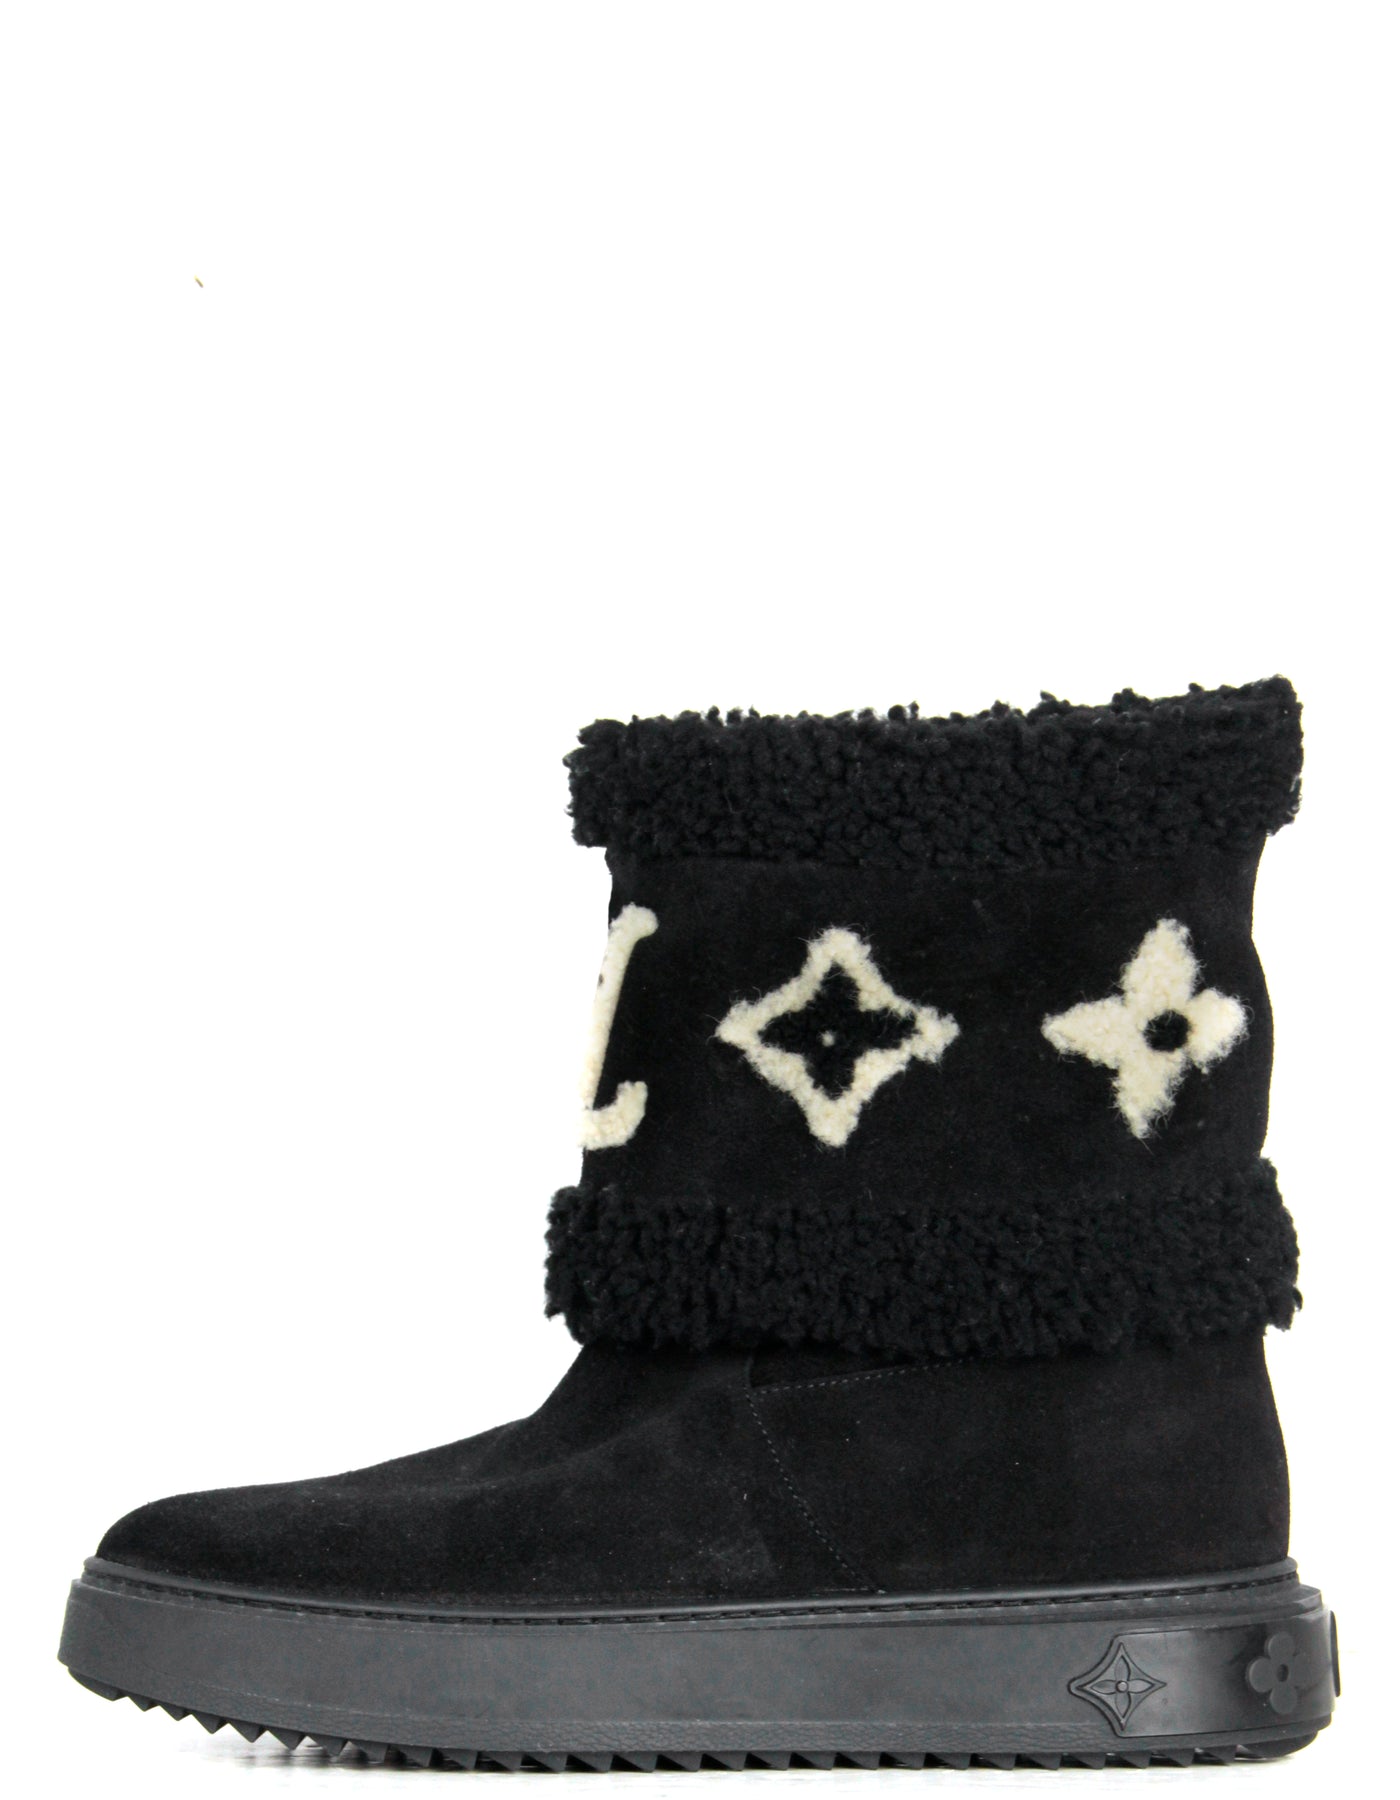 Buy [Used] LOUIS VUITTON Snow Drop Line Ankle Boots Suede Black 1A925 from  Japan - Buy authentic Plus exclusive items from Japan